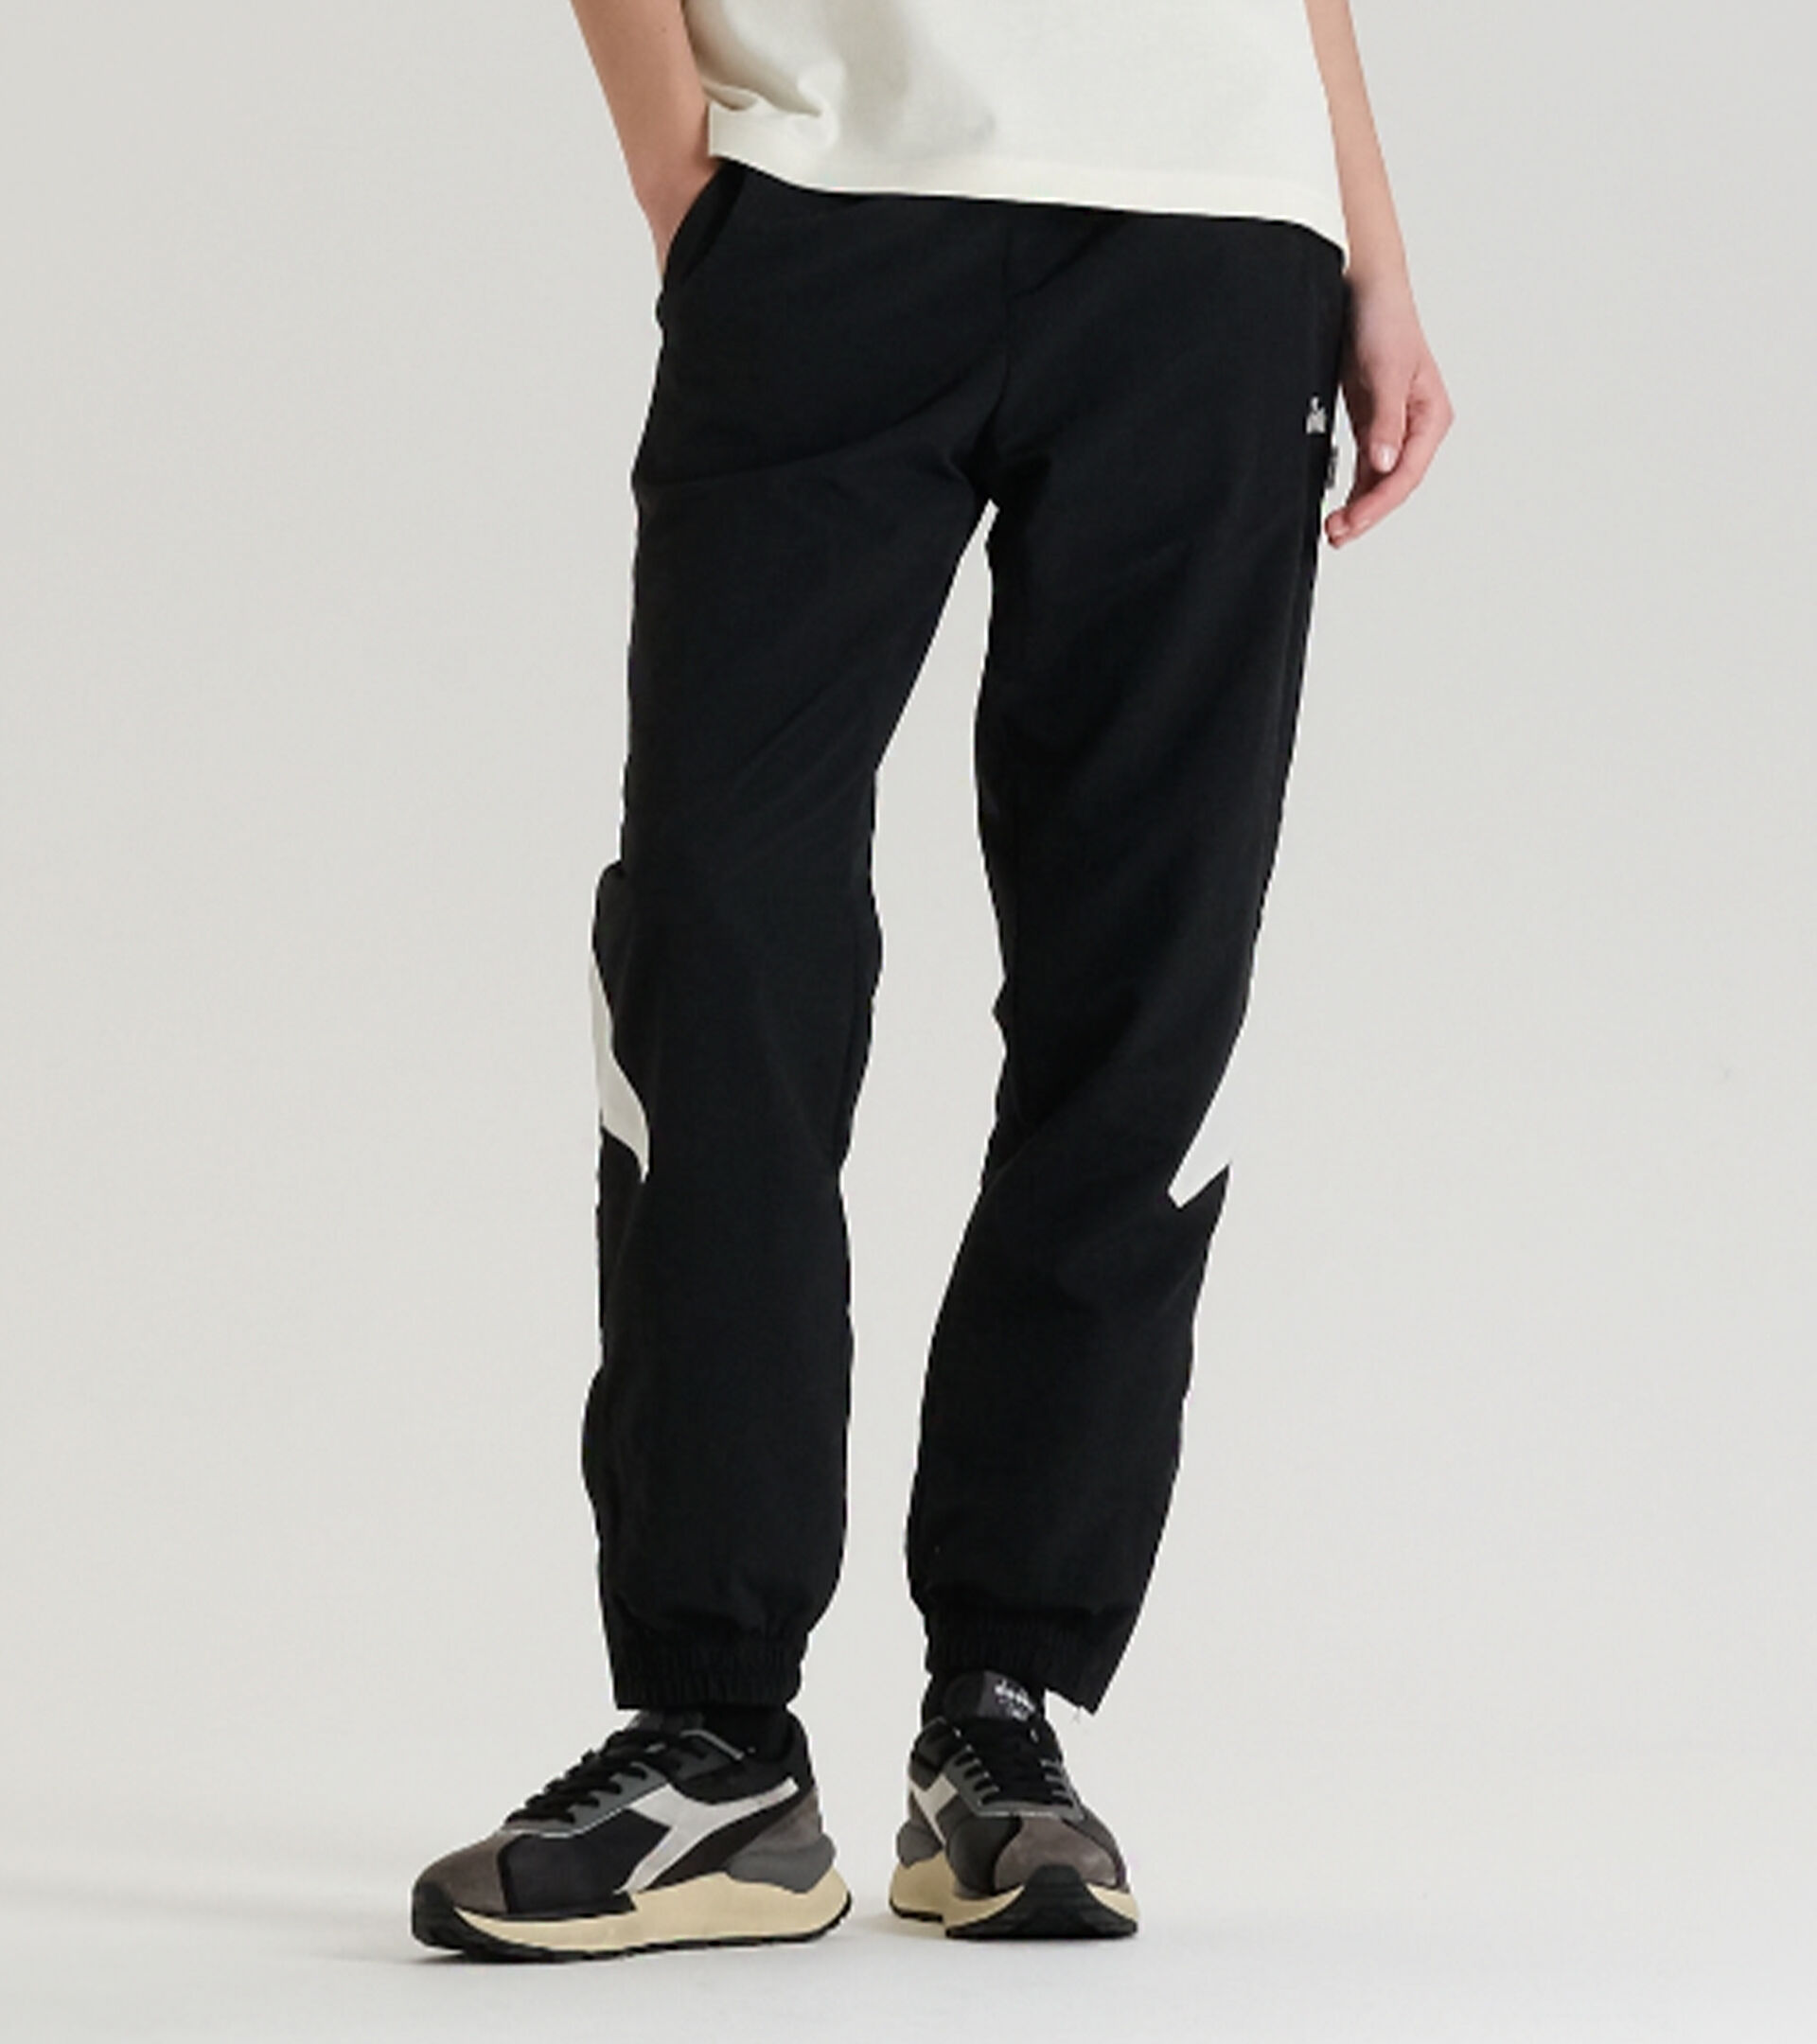 Track pants - Made in italy - Gender Neutral
 TRACK PANTS LEGACY BLACK - Diadora